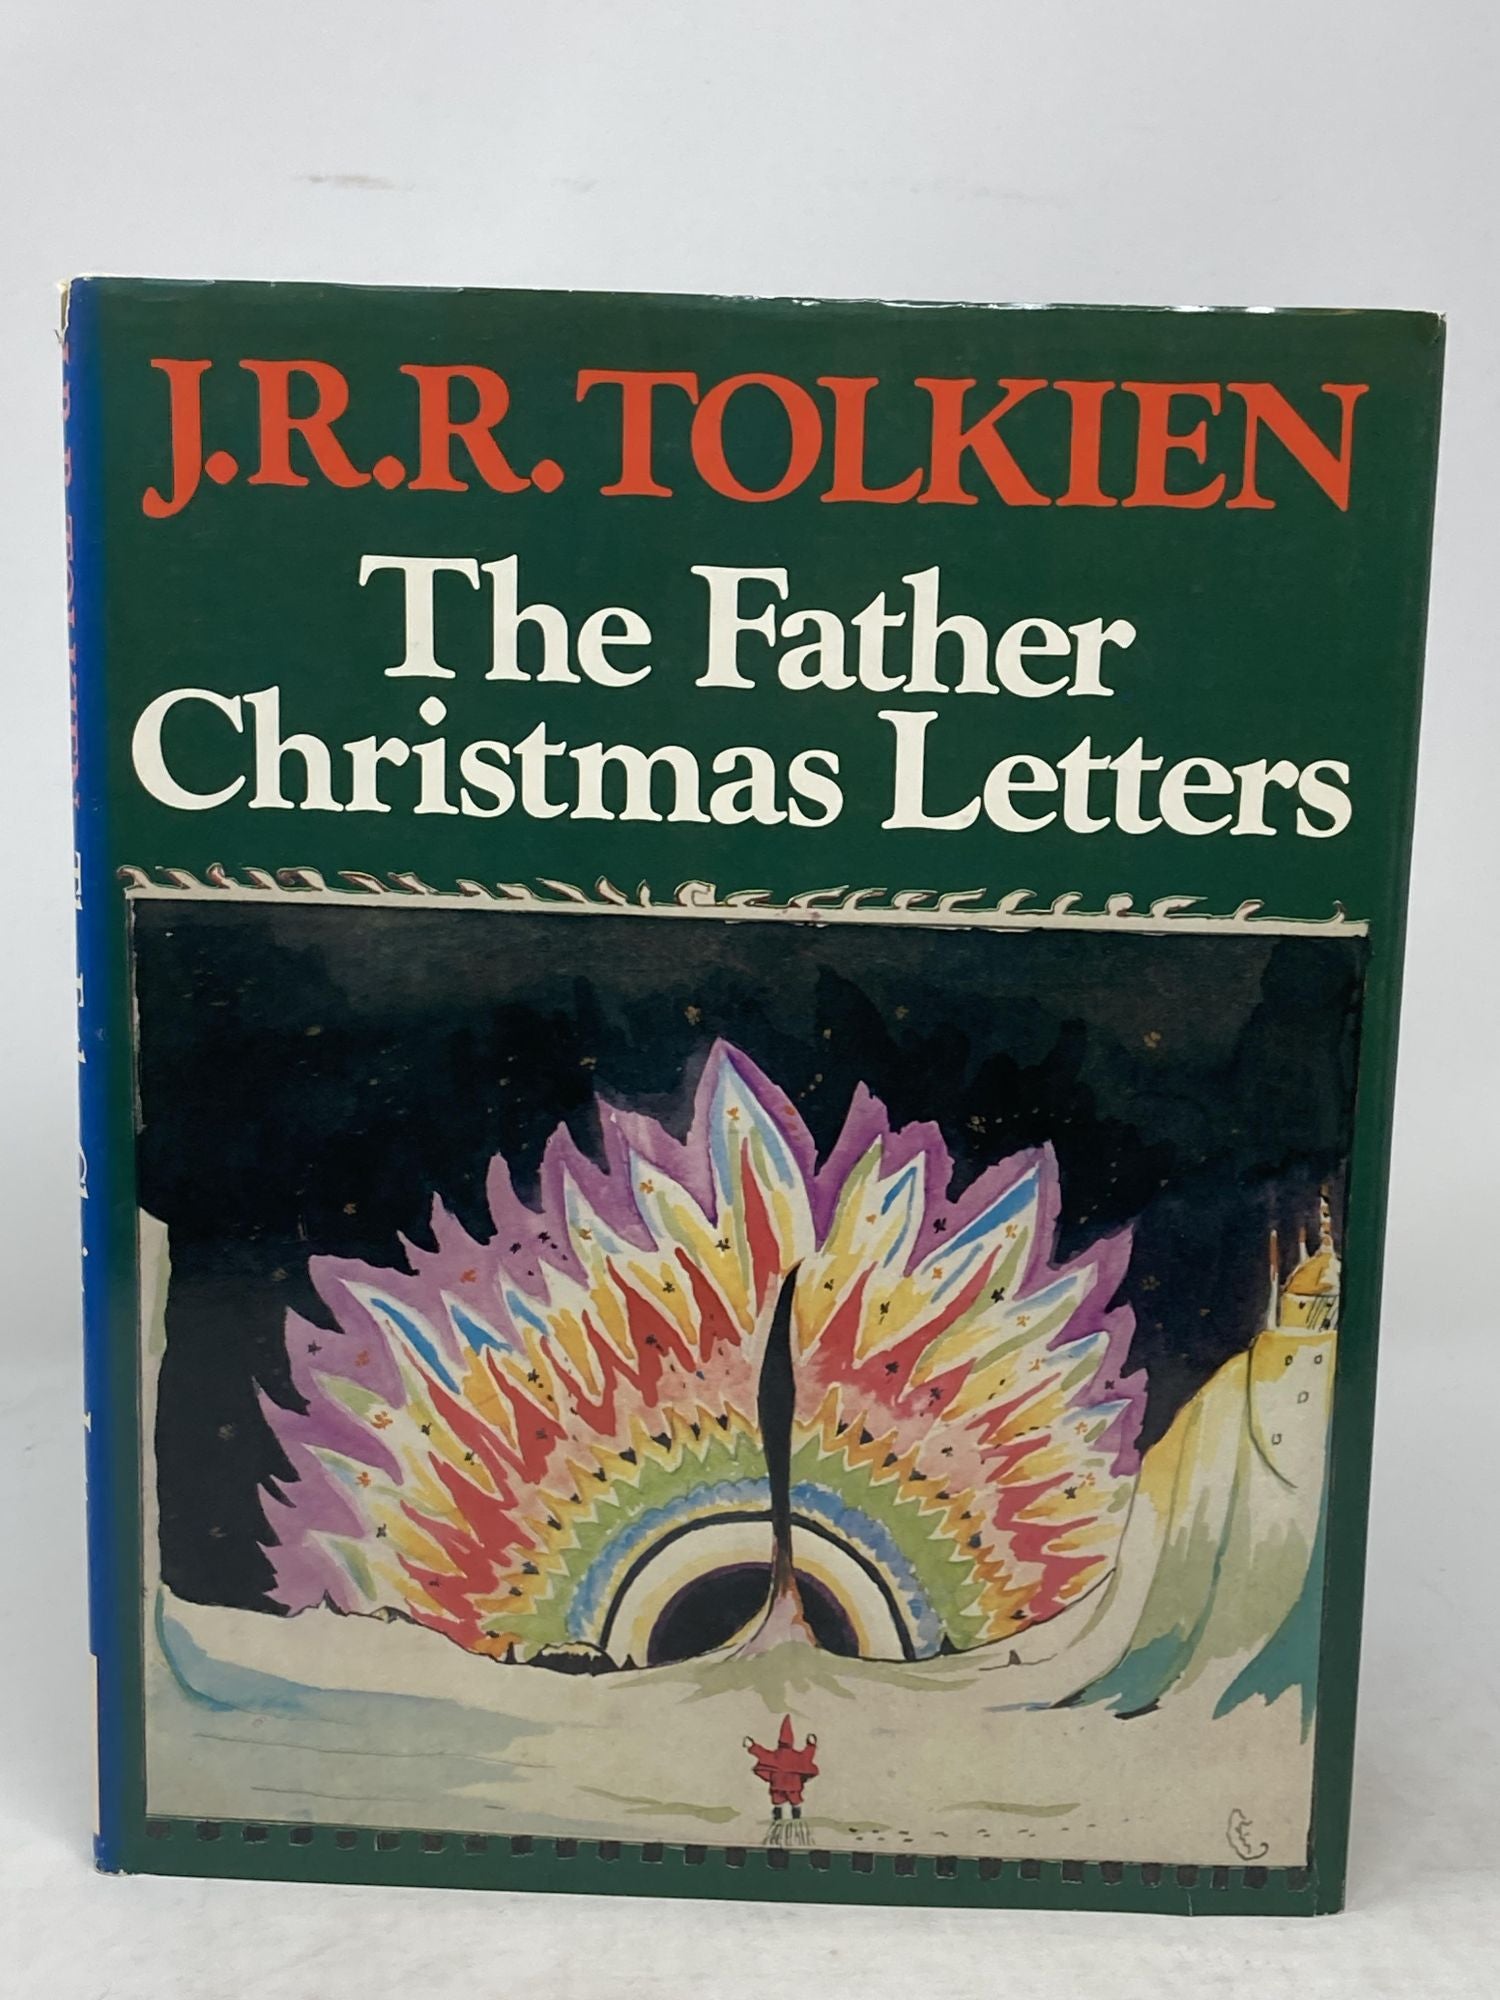 Tolkein, J.R.R., (Edited by Baille Tolkien) - The Father Christmas Letters